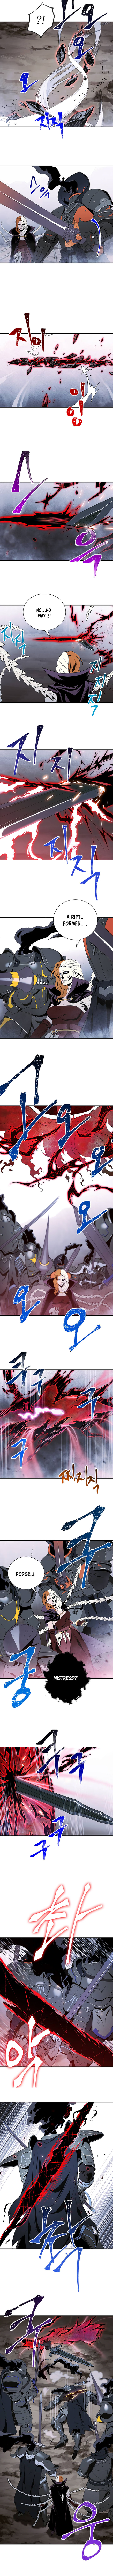 The Skeleton Soldier Failed to Defend the Dungeon [Official] chapter 0.055